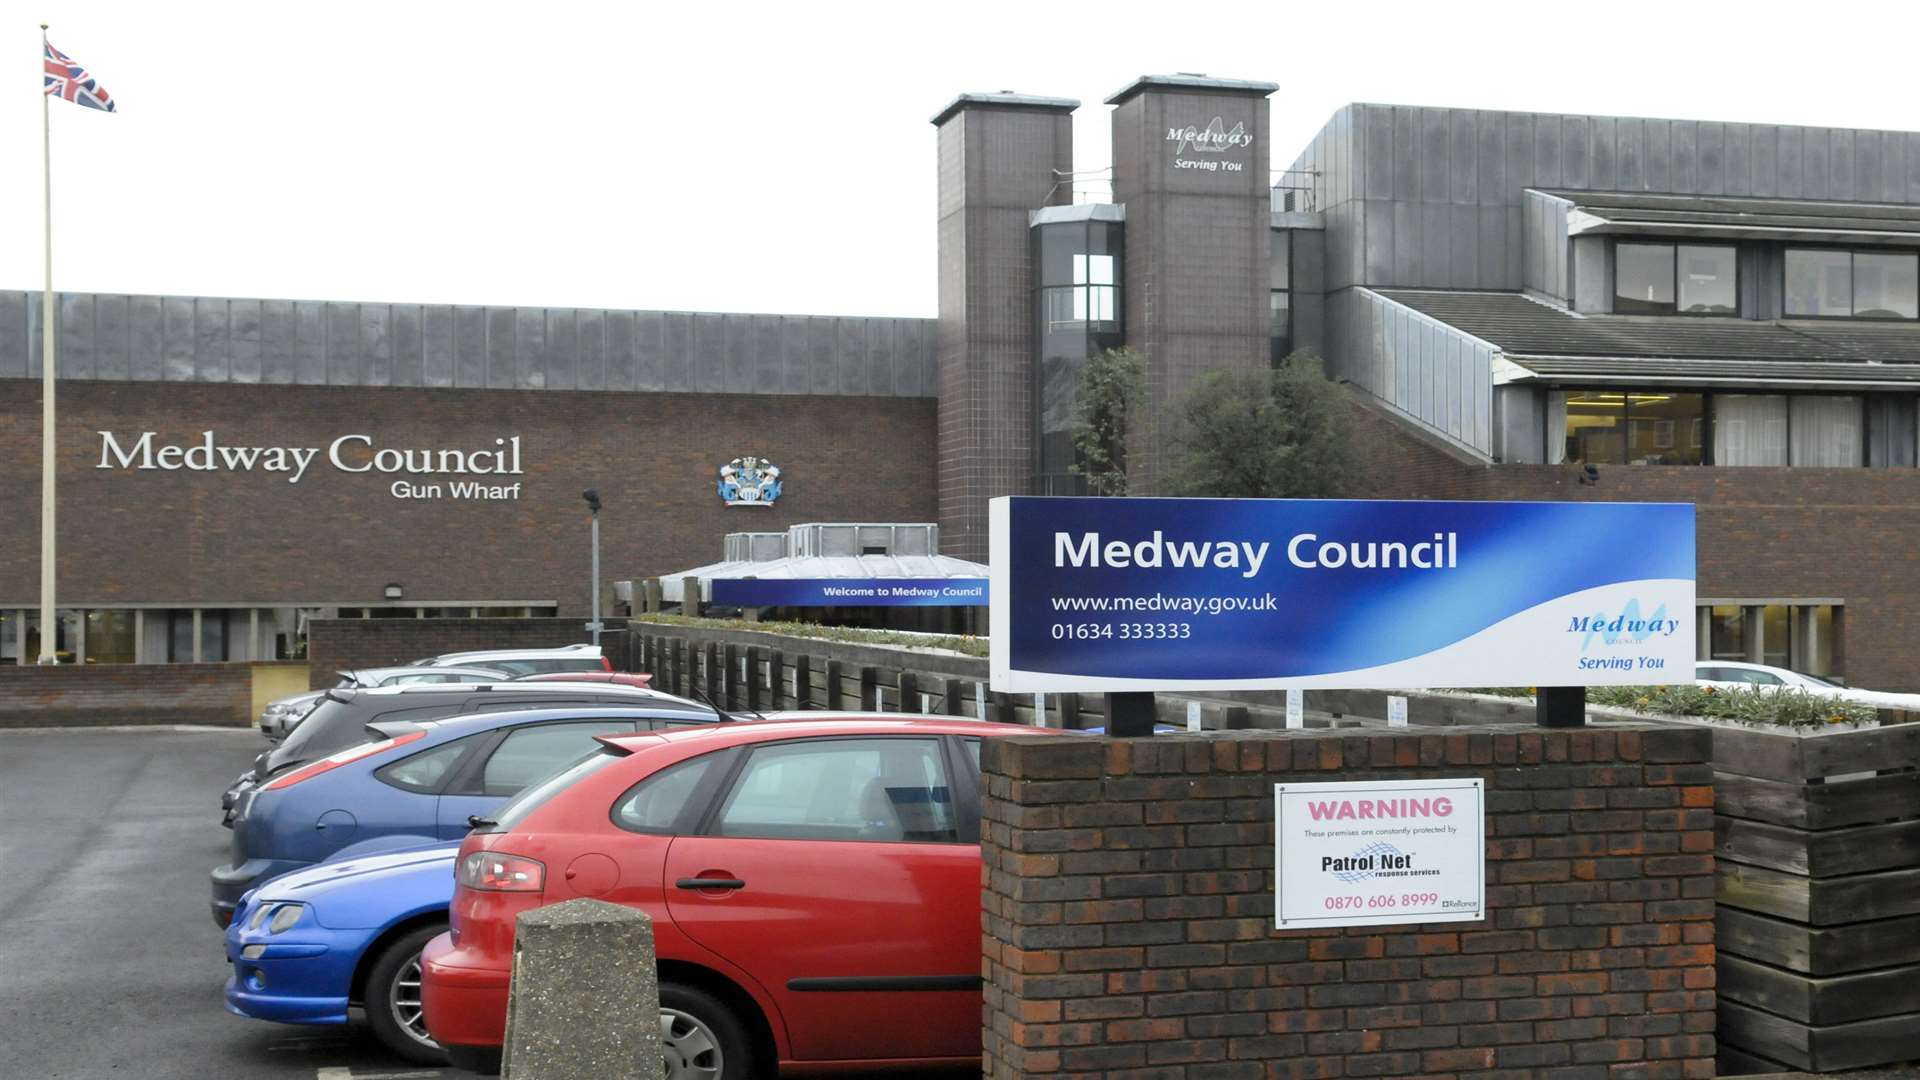 Medway Council offices at Gun Wharf in Chatham